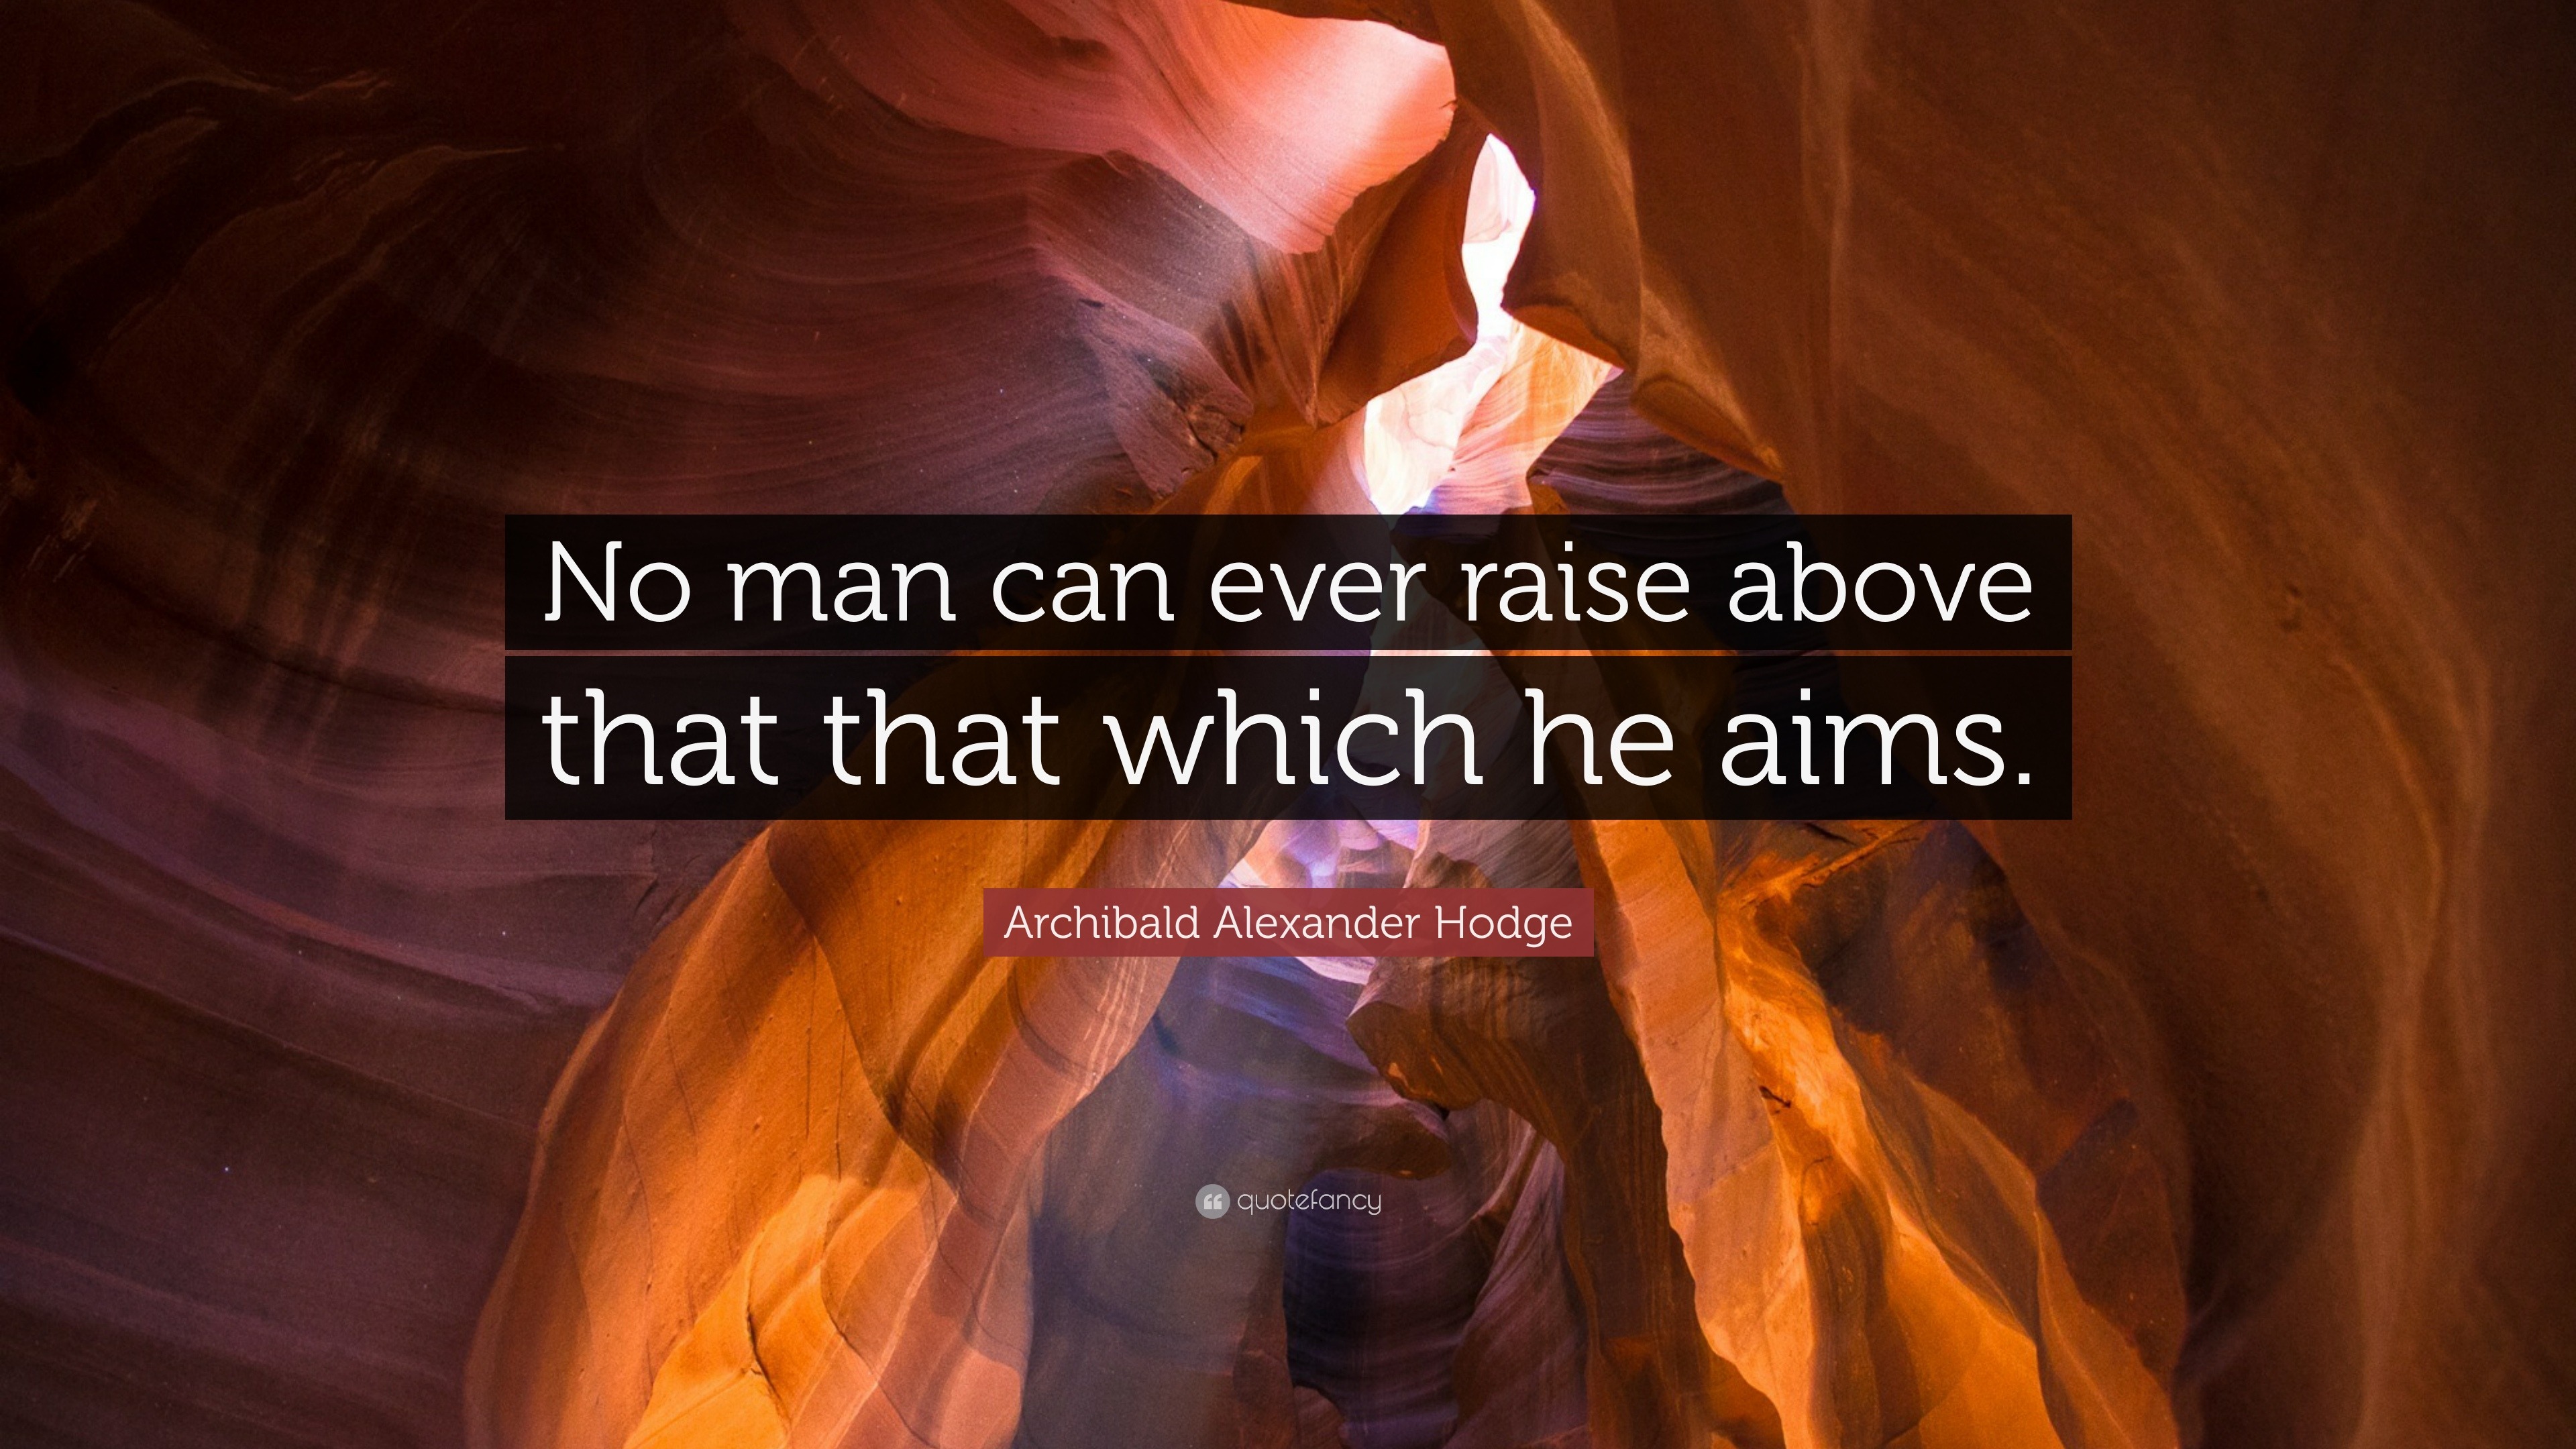 Archibald Alexander Hodge Quote: “No man can ever raise above that that ...